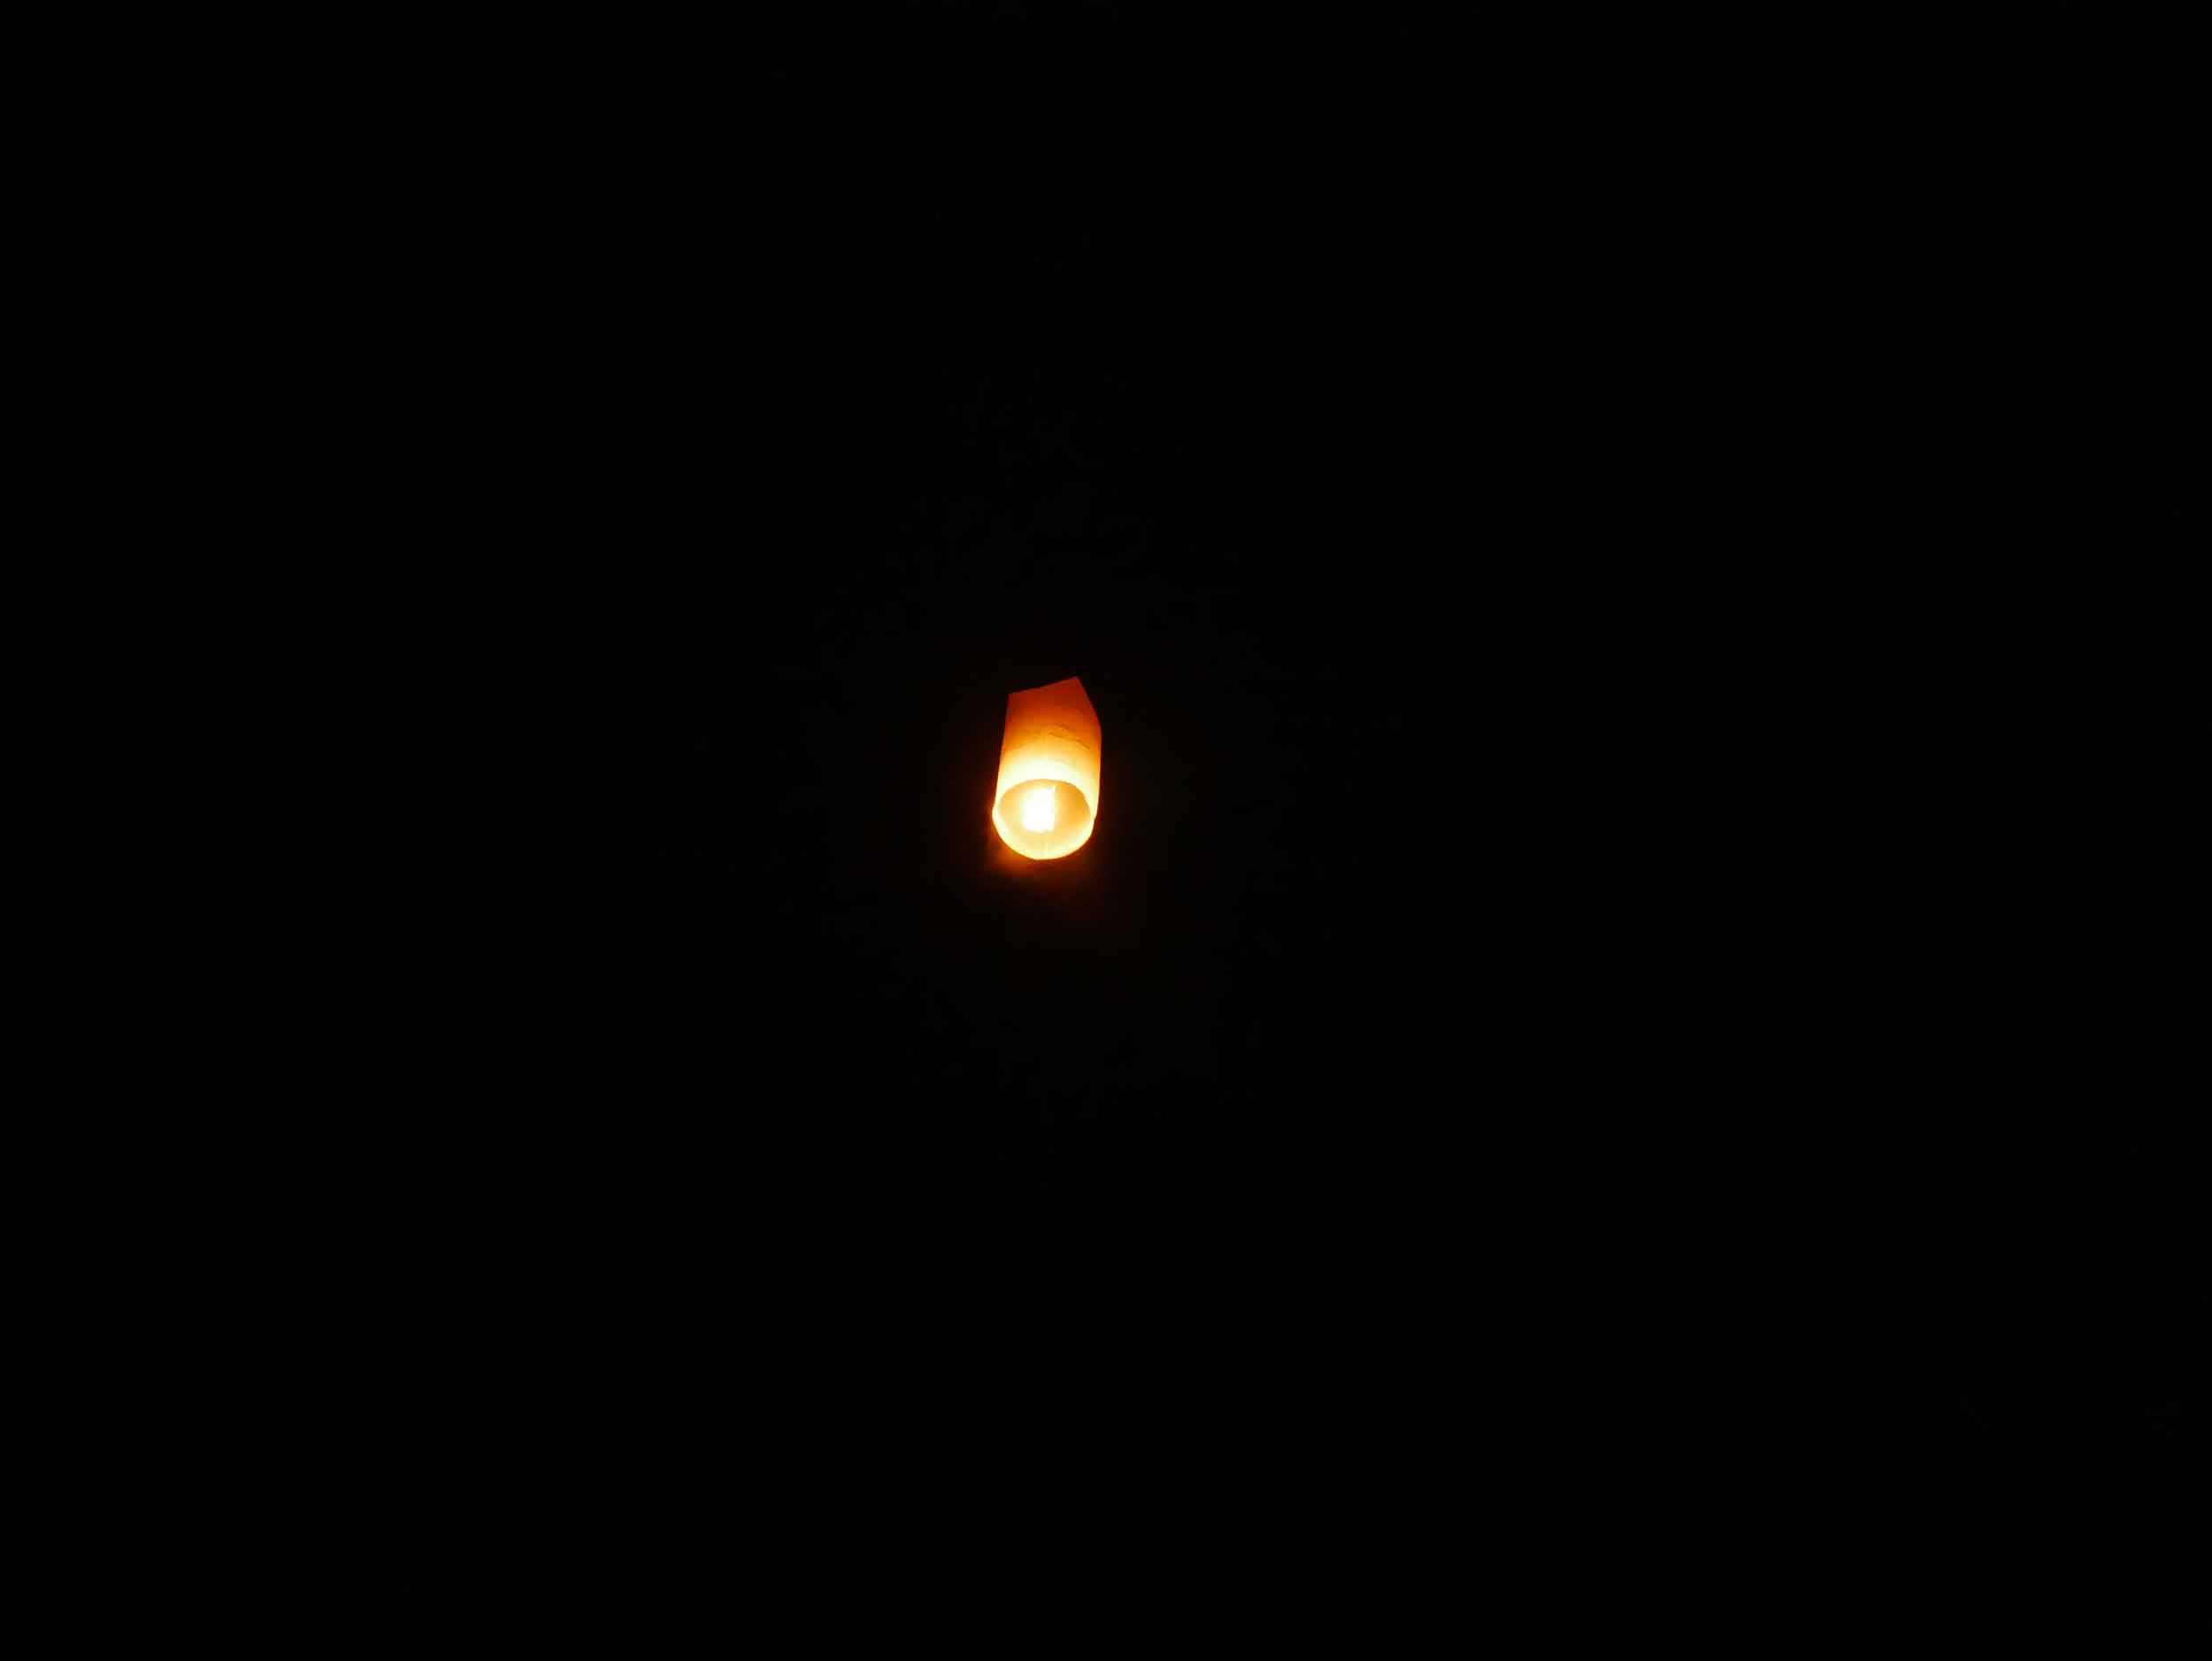  As we released the lantern, we made a wish for the future.&nbsp; 